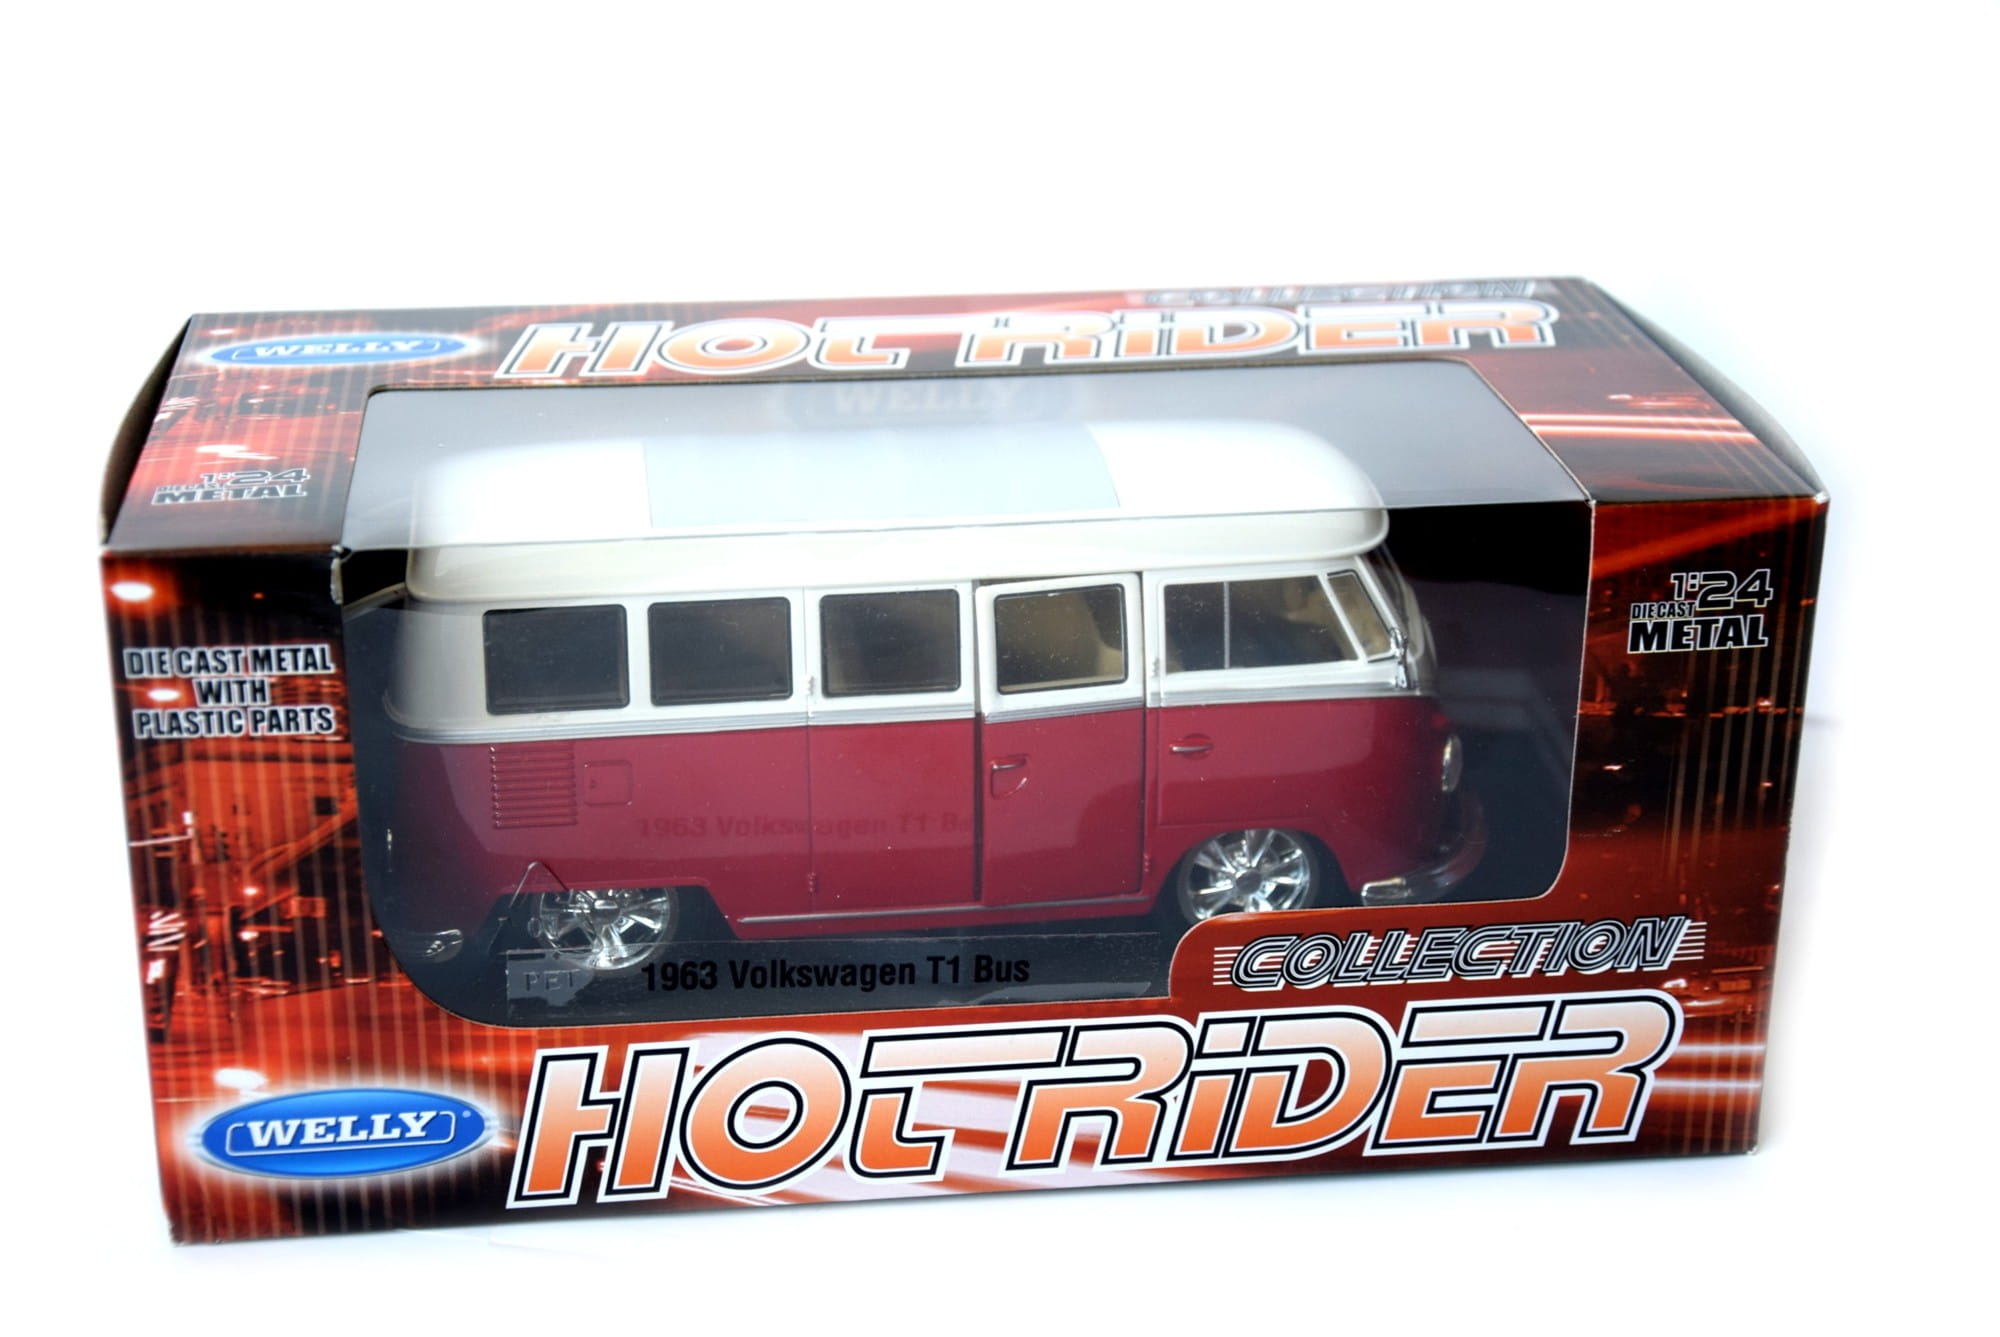 Welly Modellauto 1:24 1963 VW Volkswagen Classical T1 Bus Hotrider Rot-Weiss